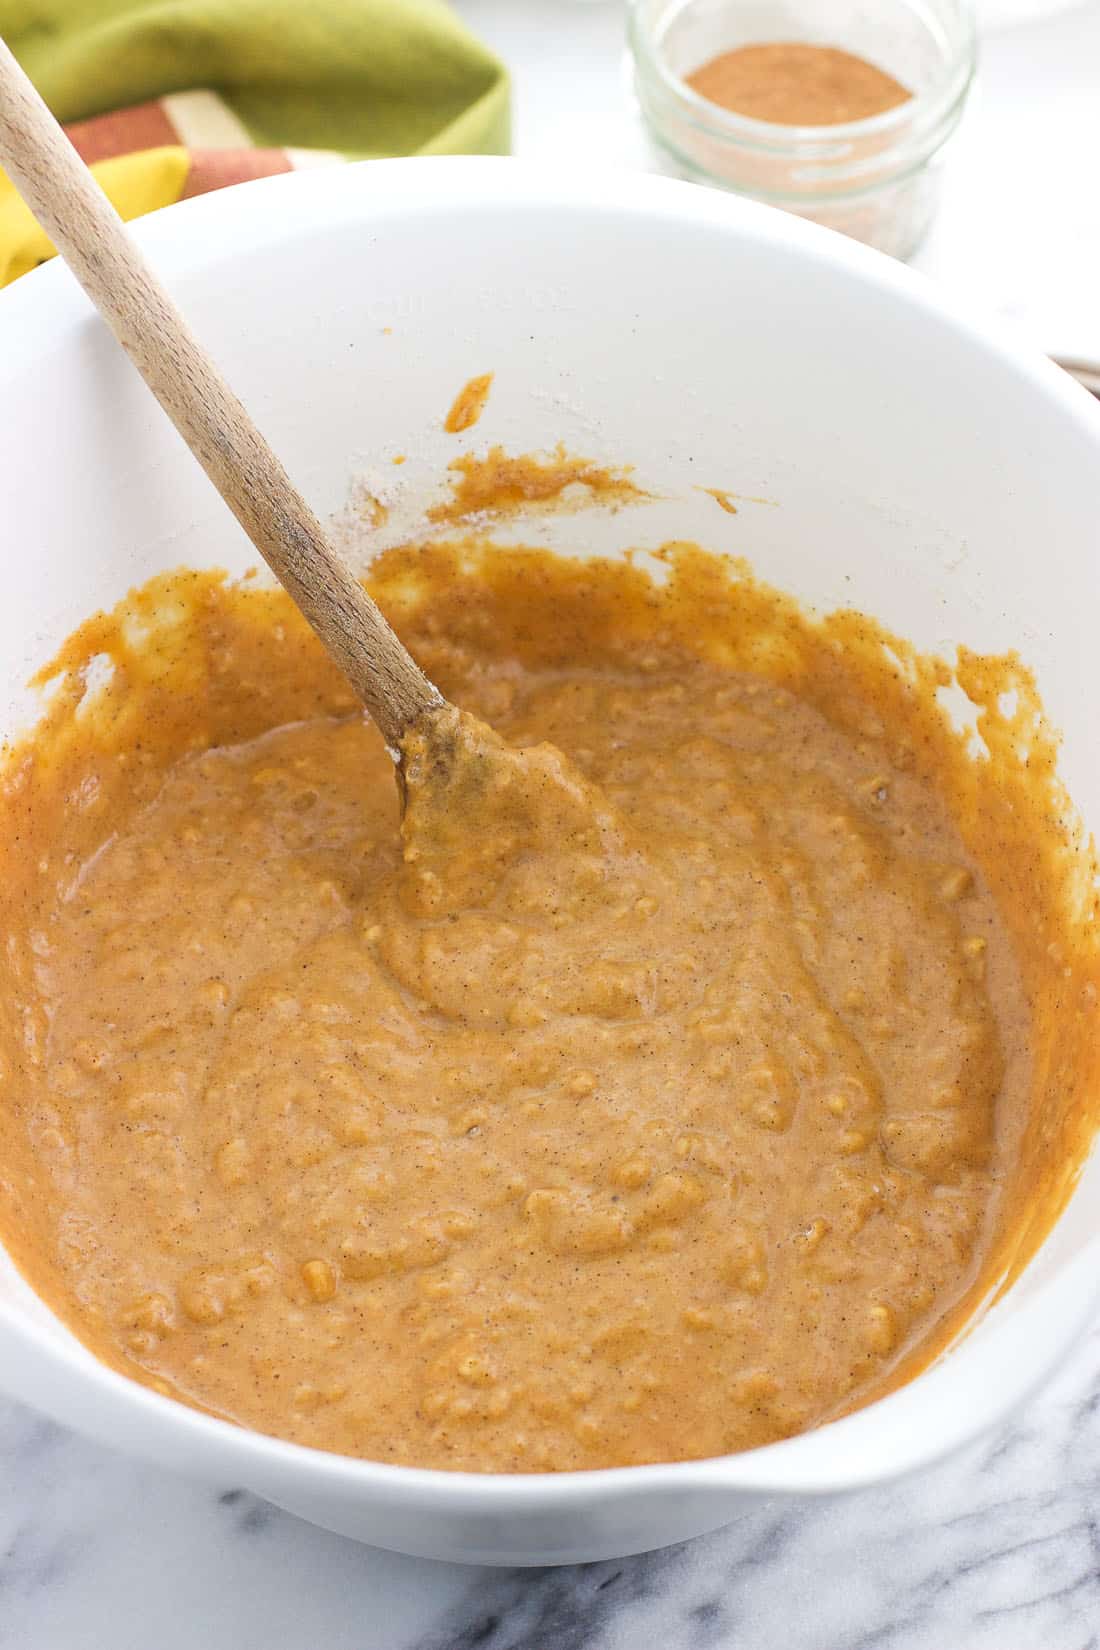 Pumpkin bread batter stirred together in a mixing bowl with a wooden spoon